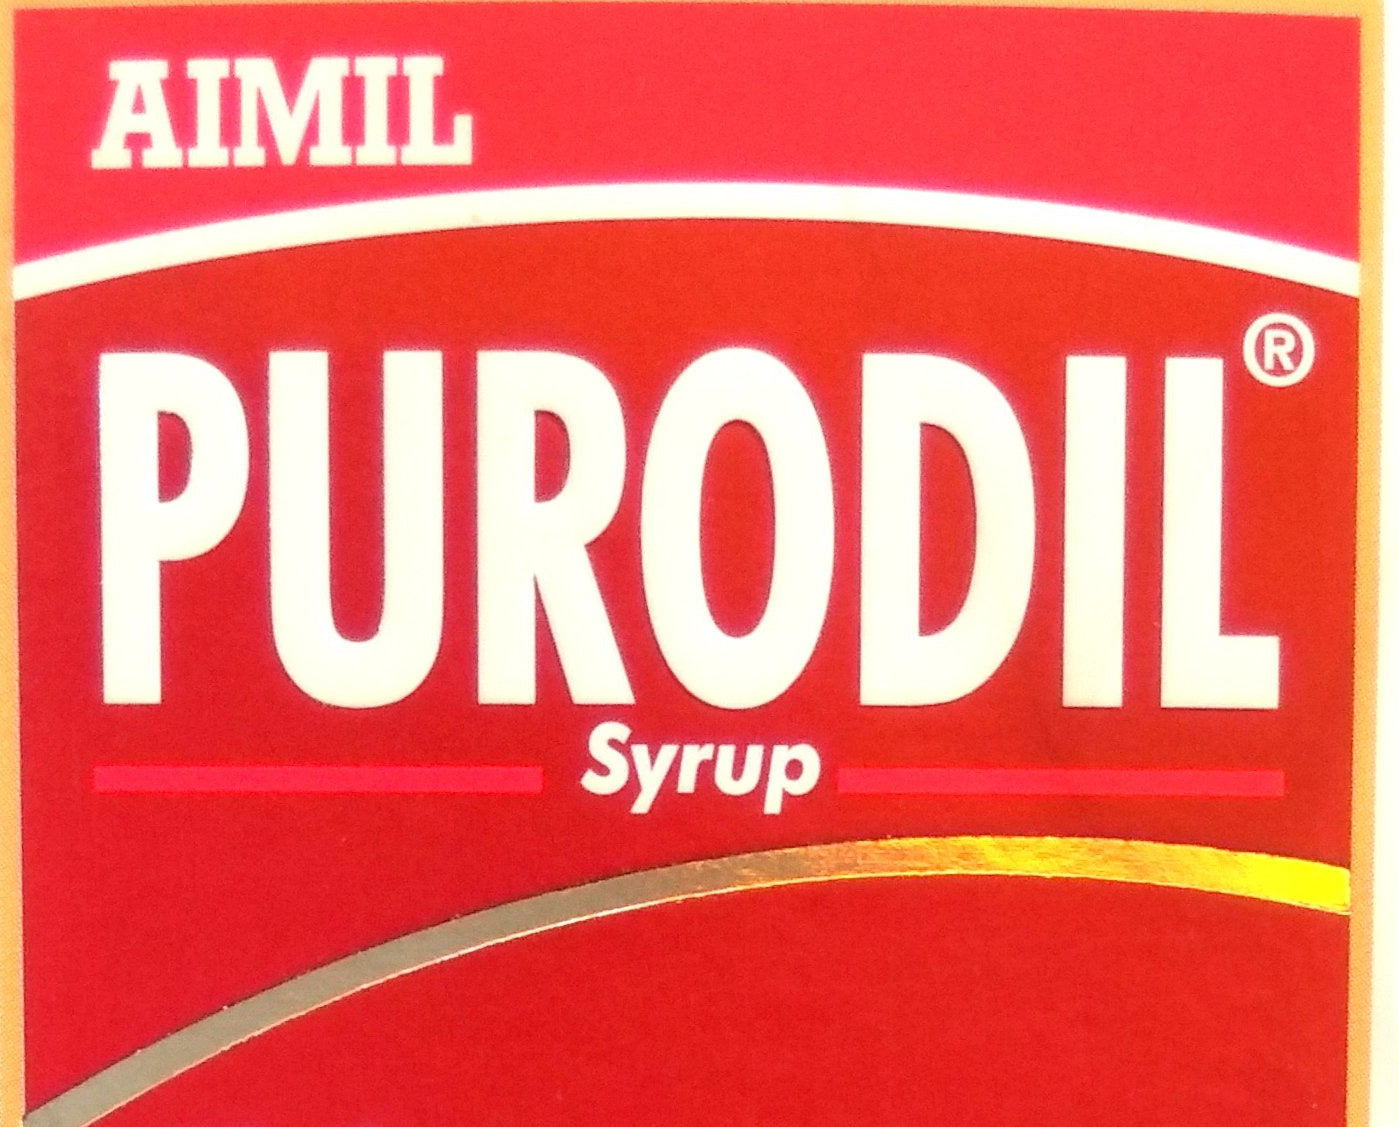 Shop Purodil Syrup 200ml at price 248.00 from Aimil Online - Ayush Care